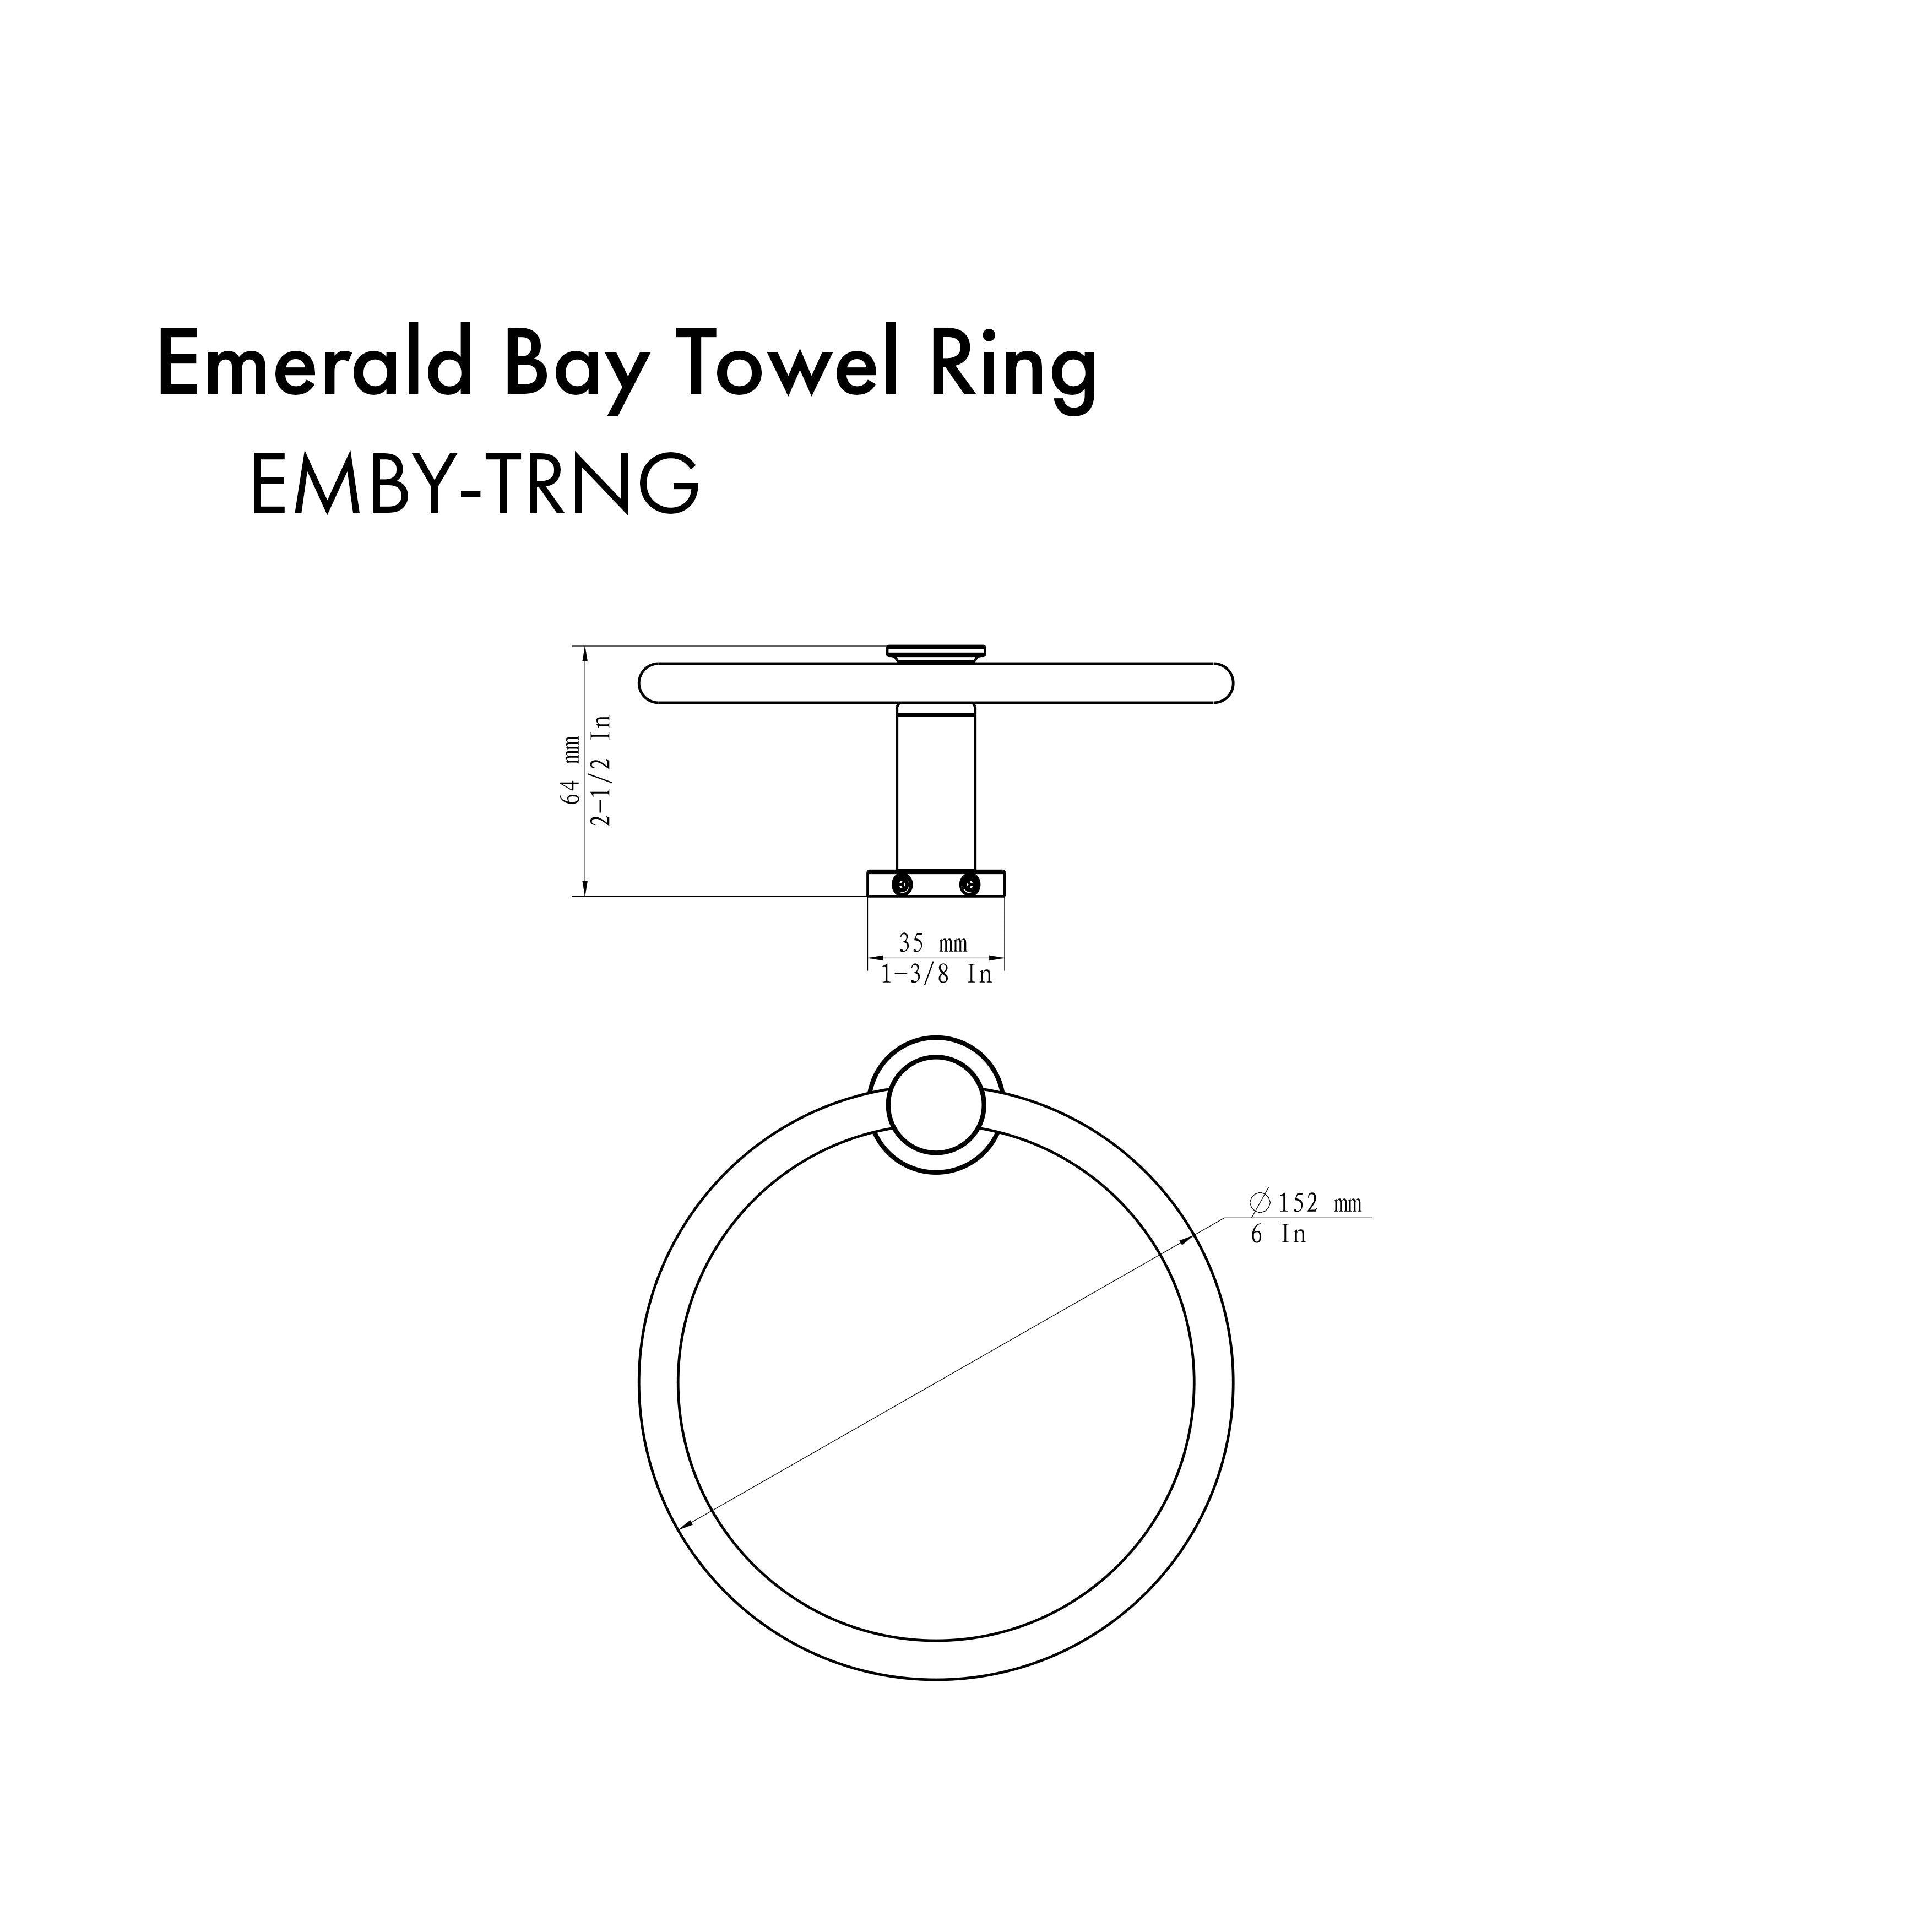 ZLINE Emerald Bay Towel Ring in Polished Gold (EMBY-TRNG-PG)